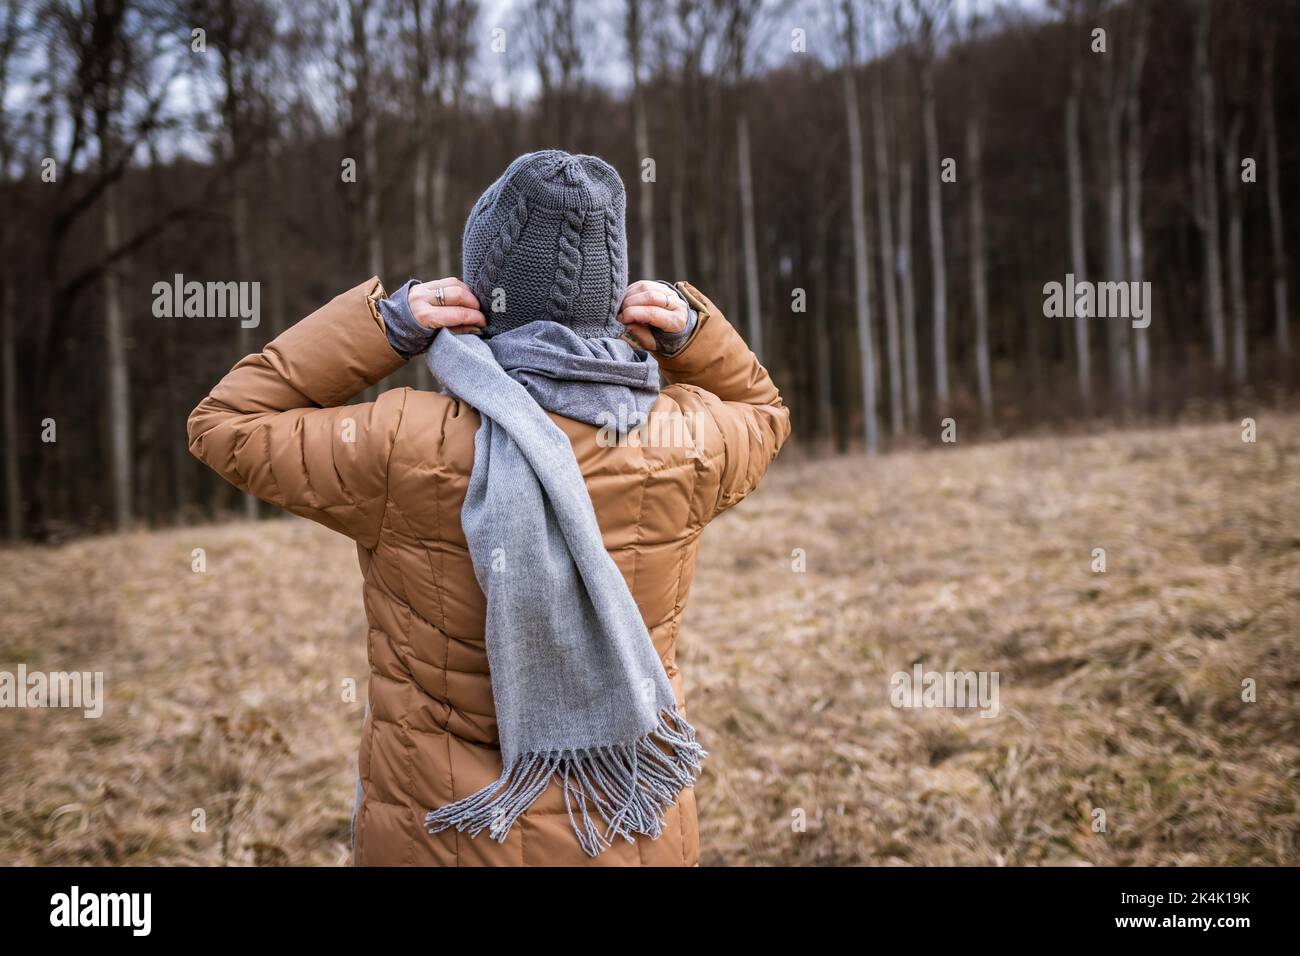 Wind and cold weather in fall season. Woman wearing coat, scarf and knit hat outdoors Stock Photo